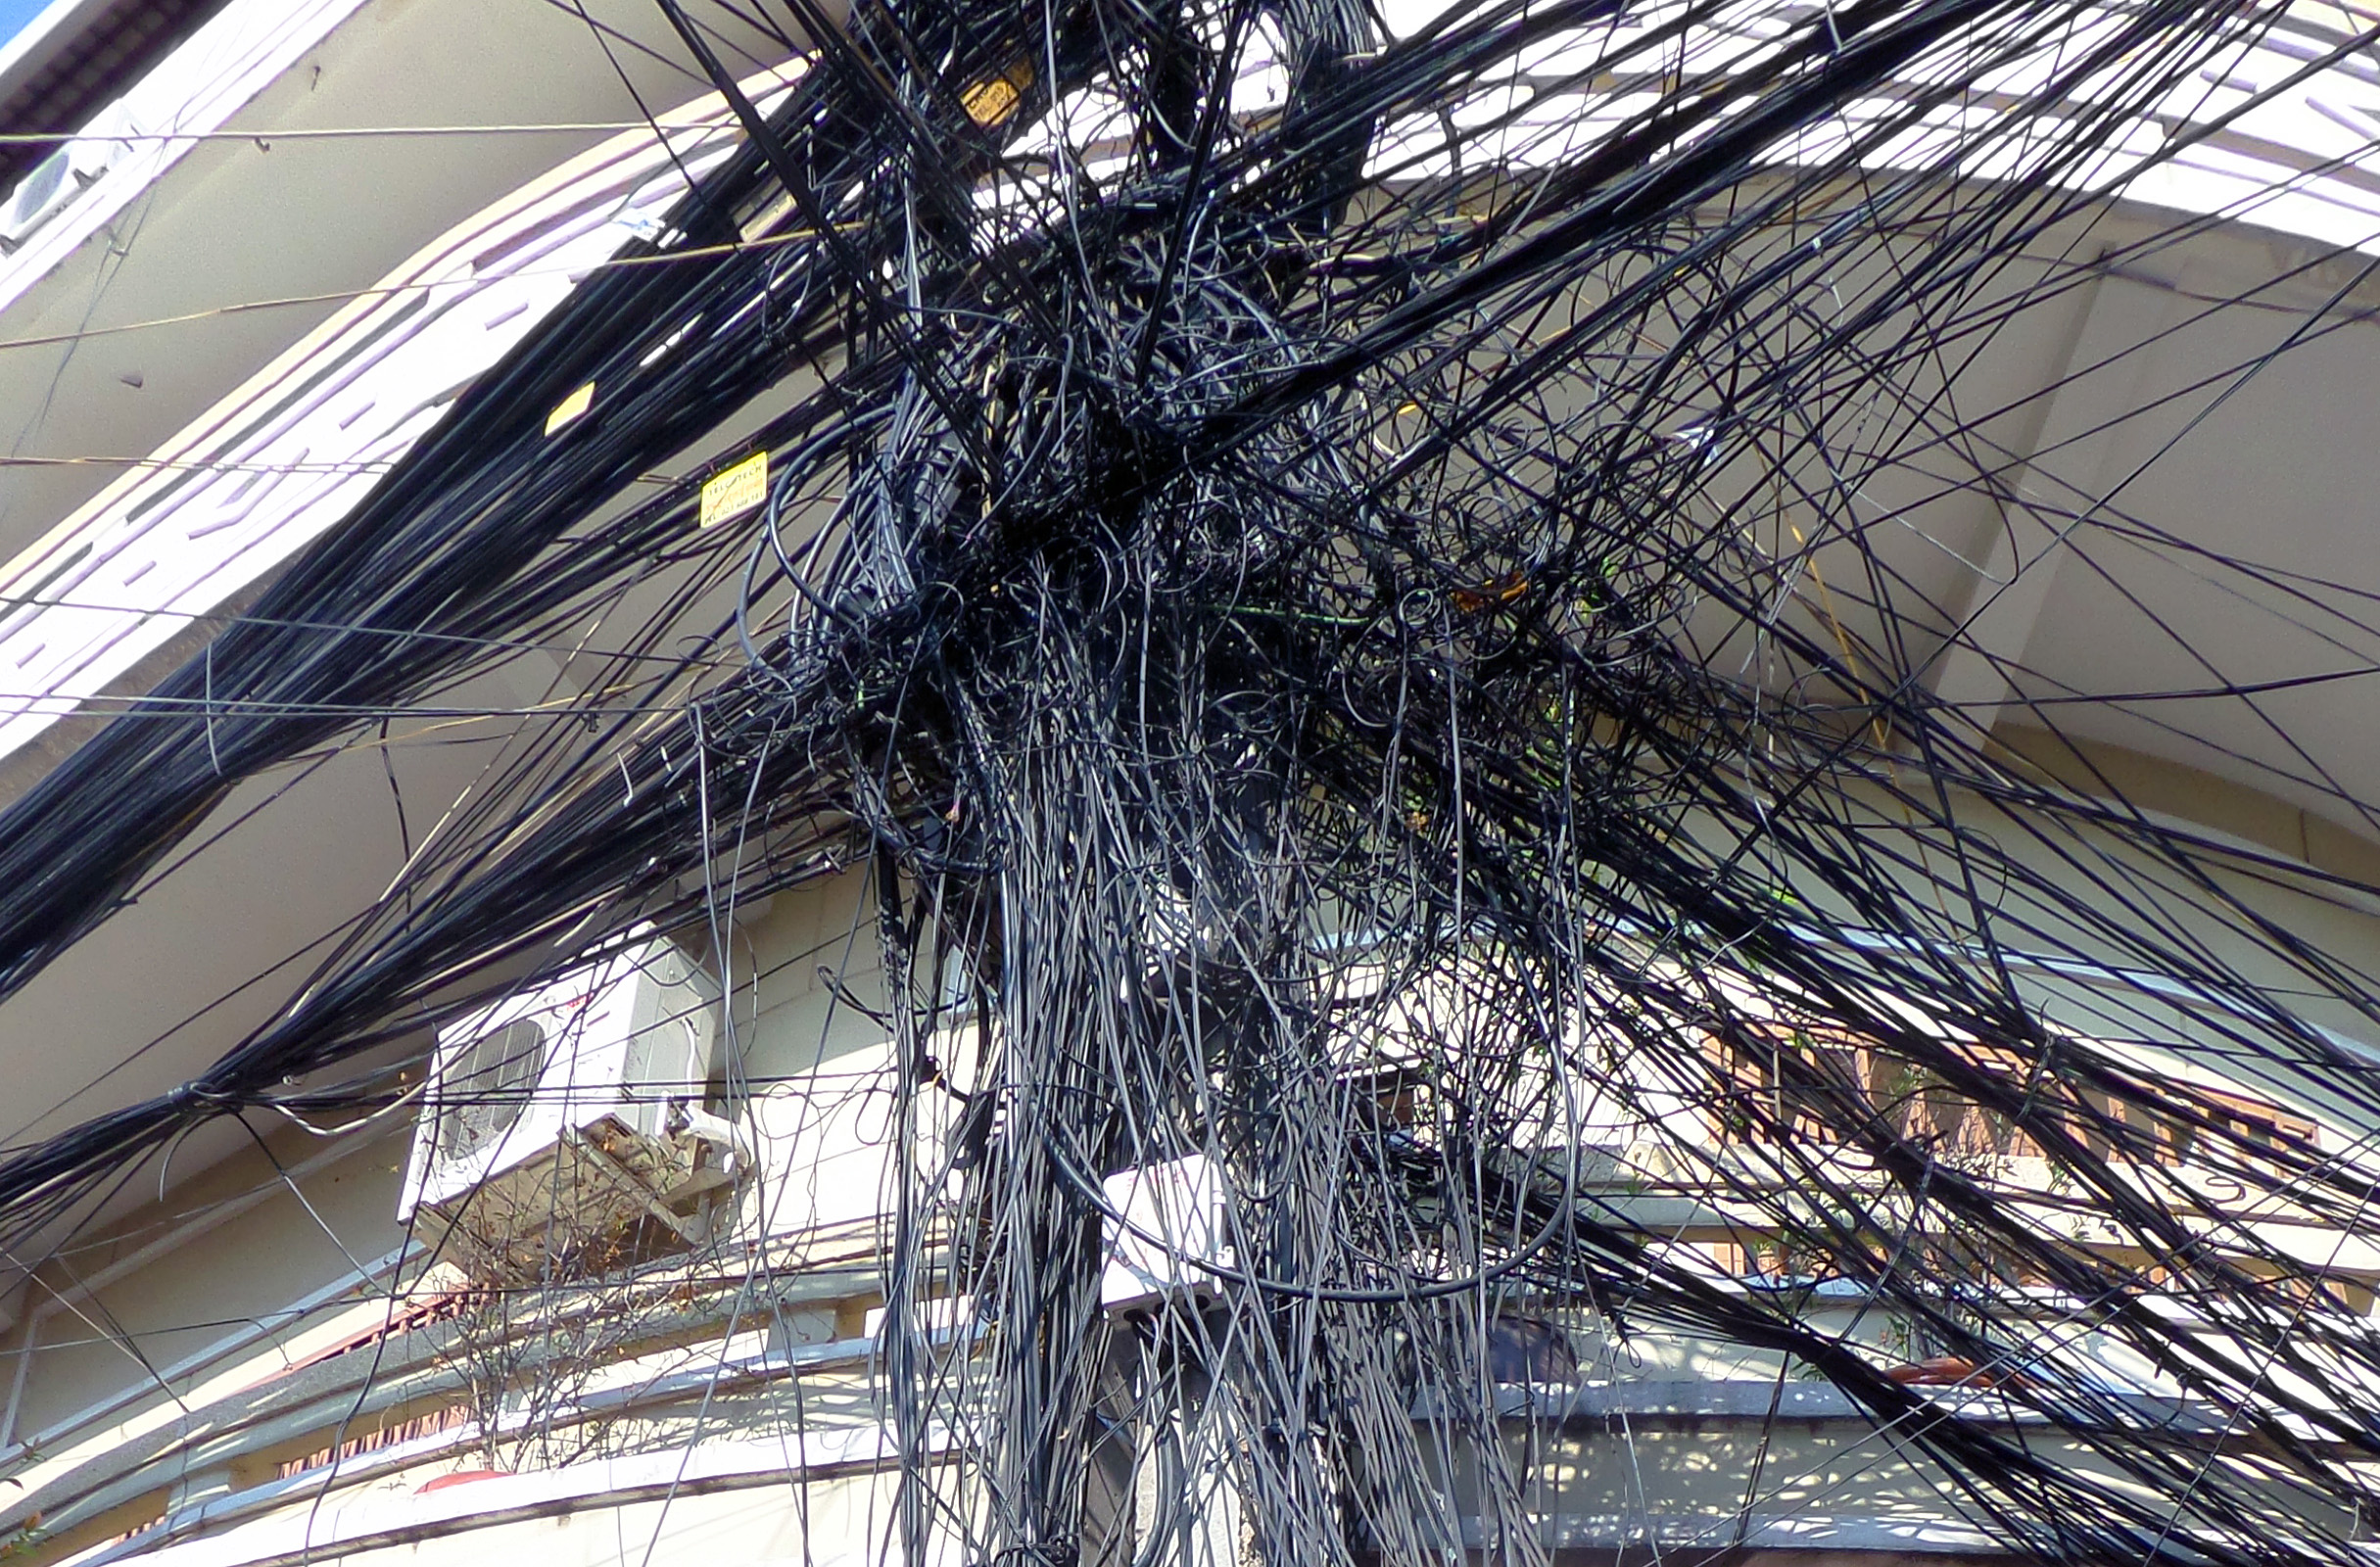 Chaotic Cabling